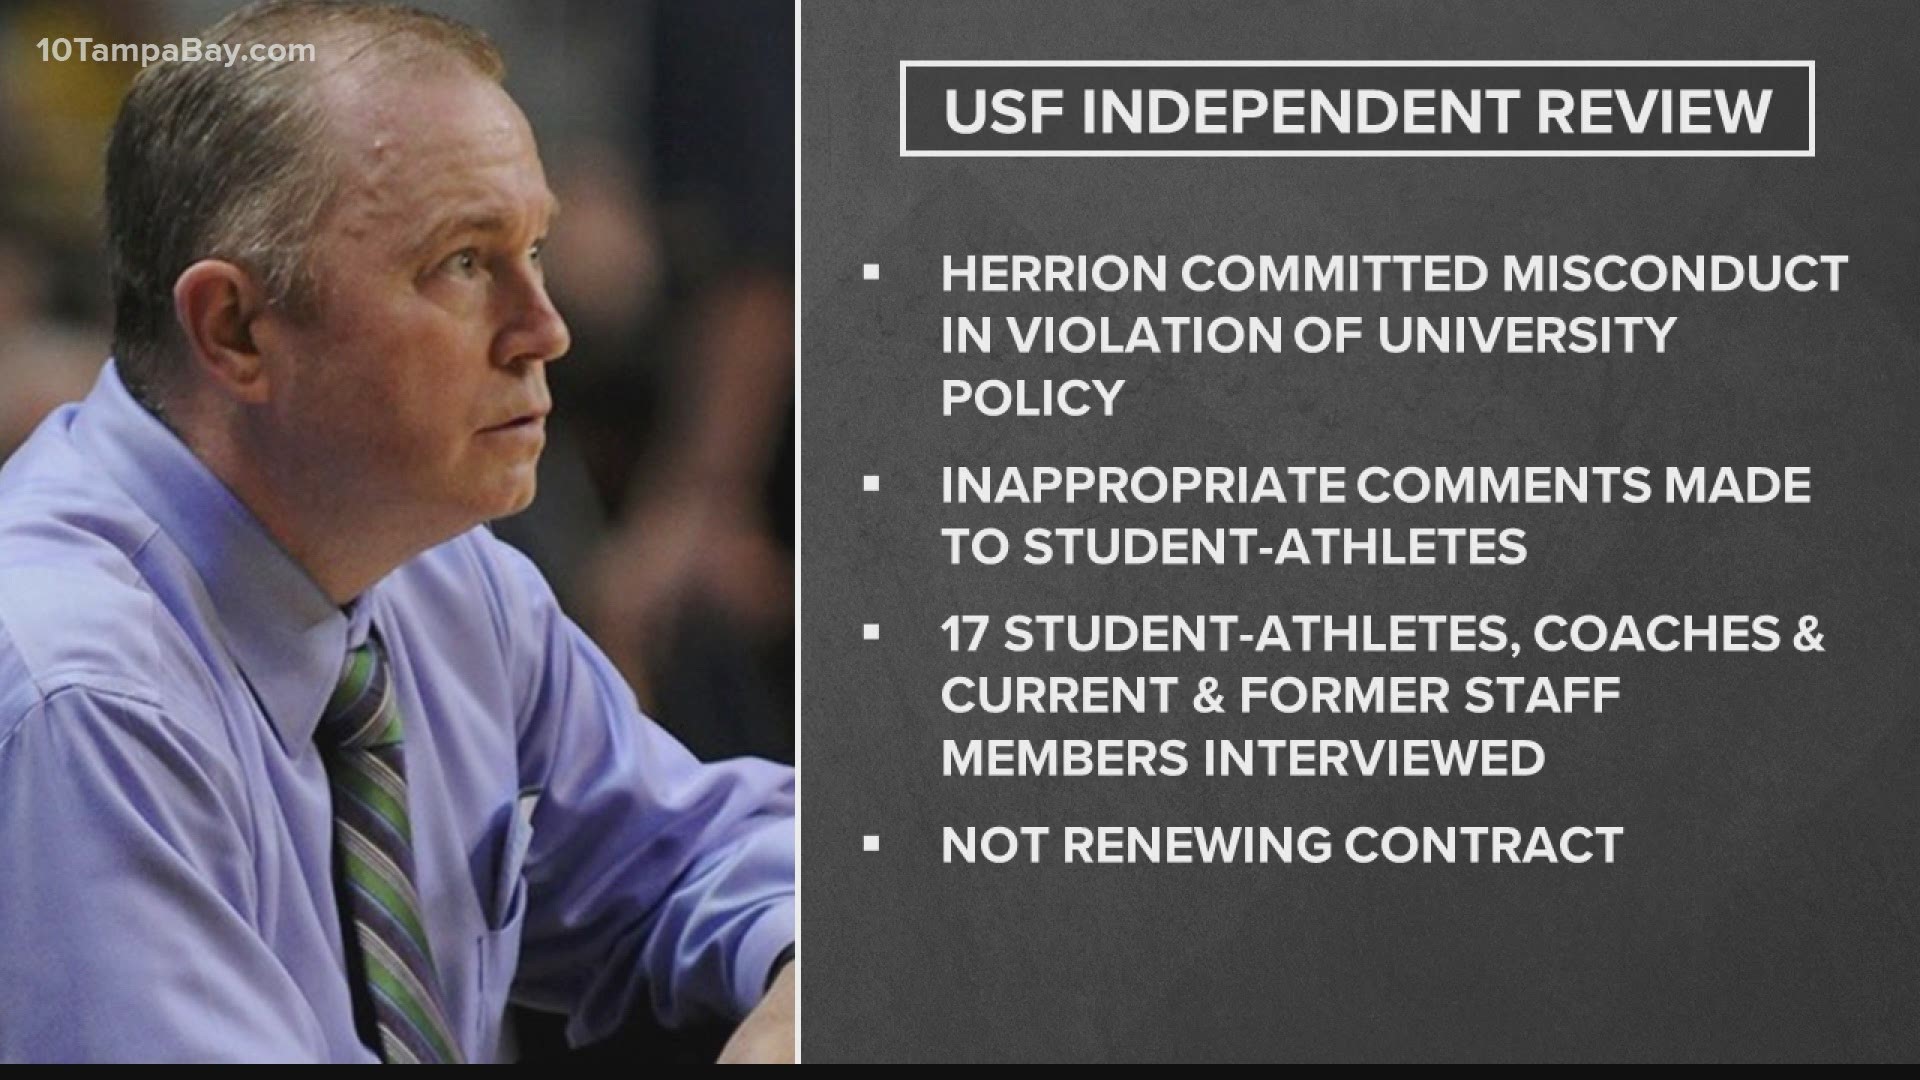 The review found he committed misconduct in violation of university policy.